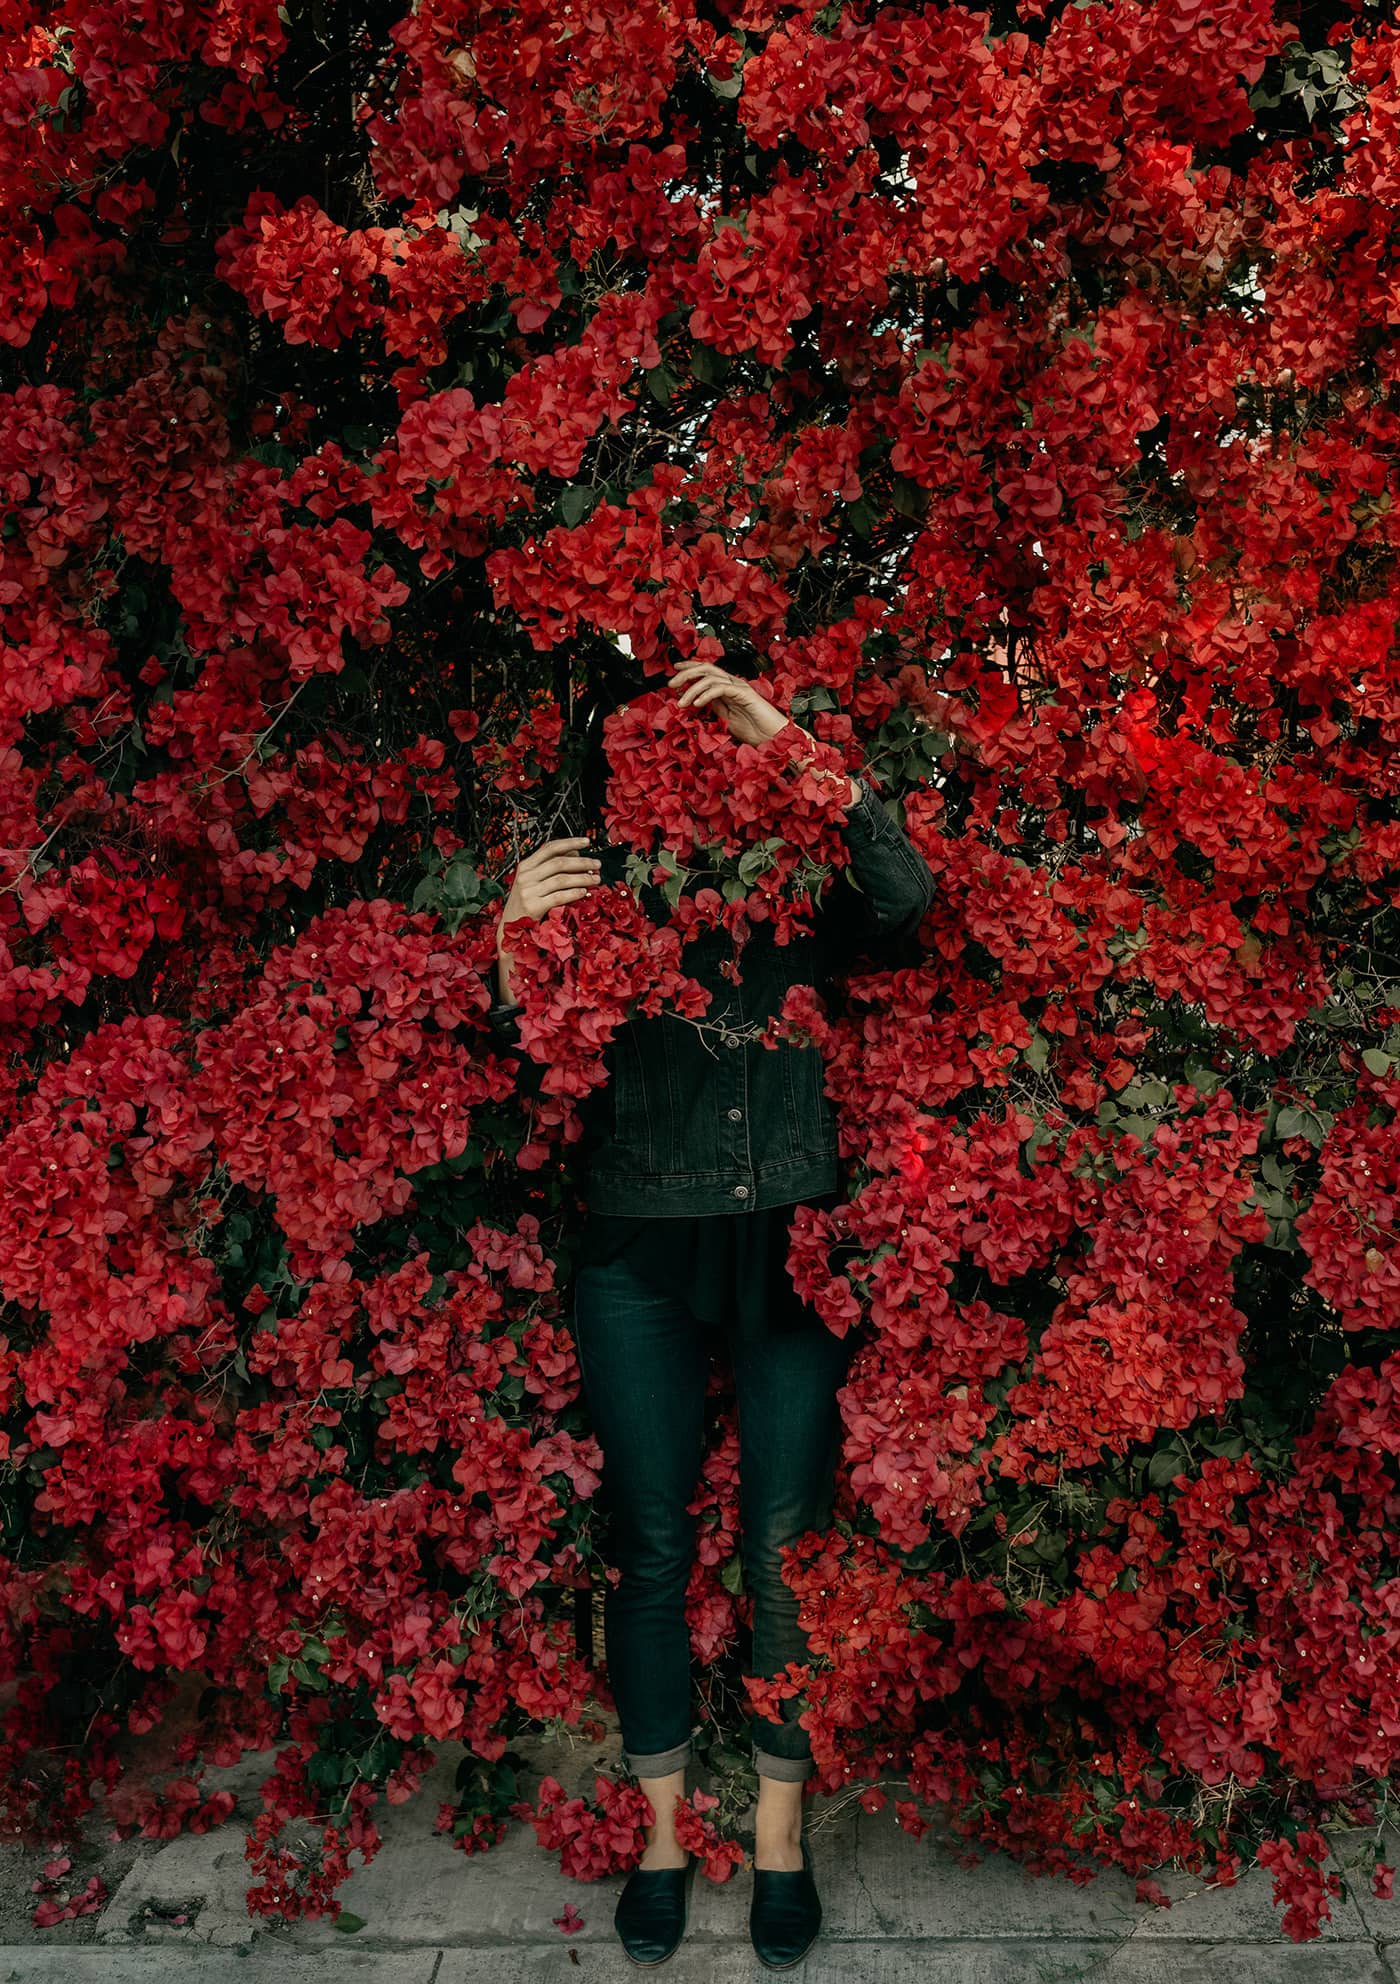 Mysterious Woman Hiding In Red Flowers